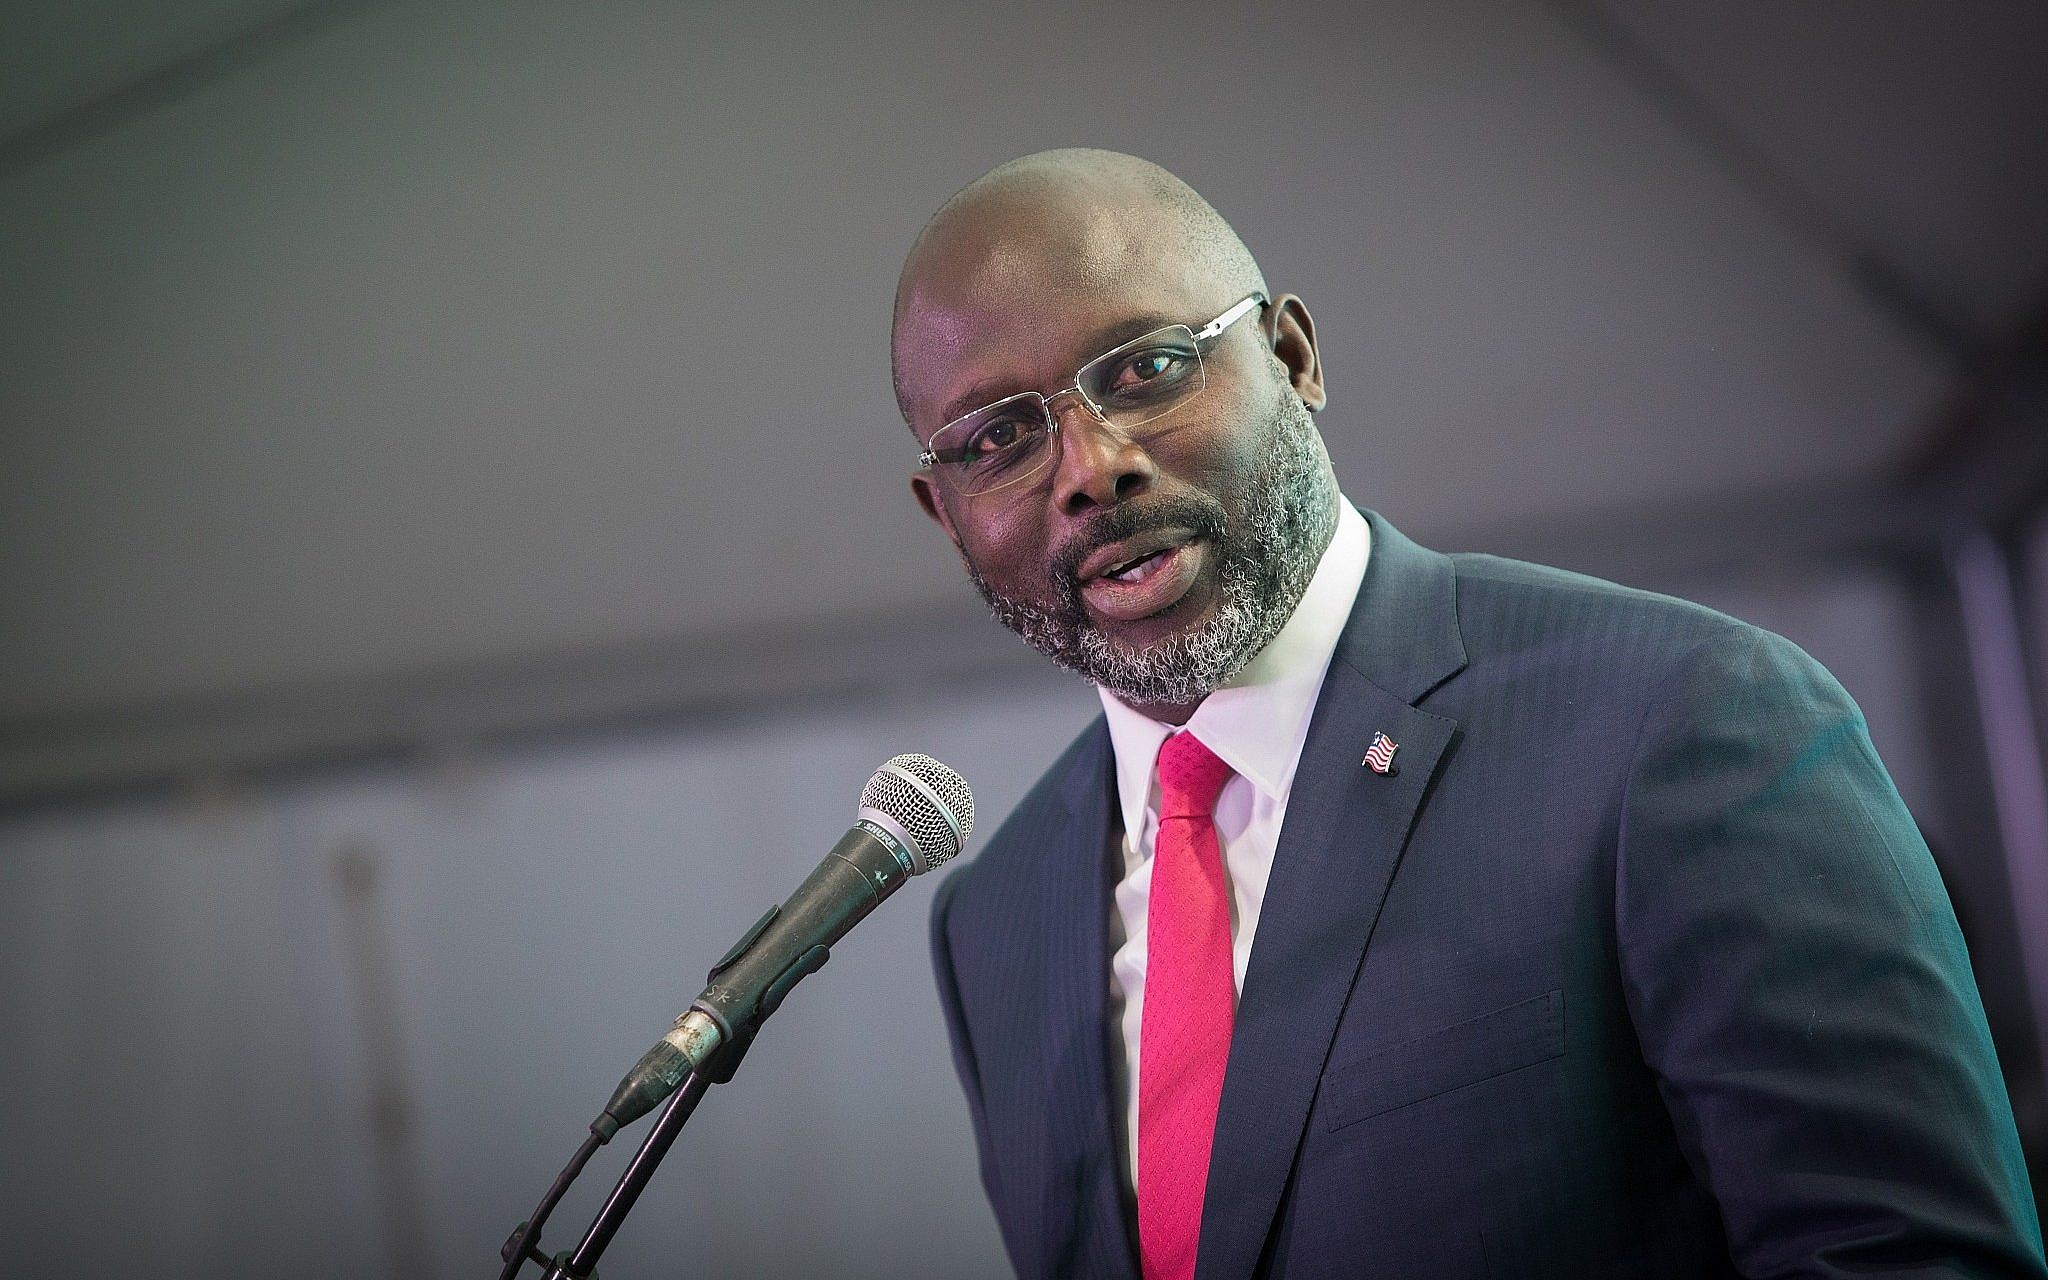 Africa Needs to Pull from Dependency Syndrome – Pres. Weah